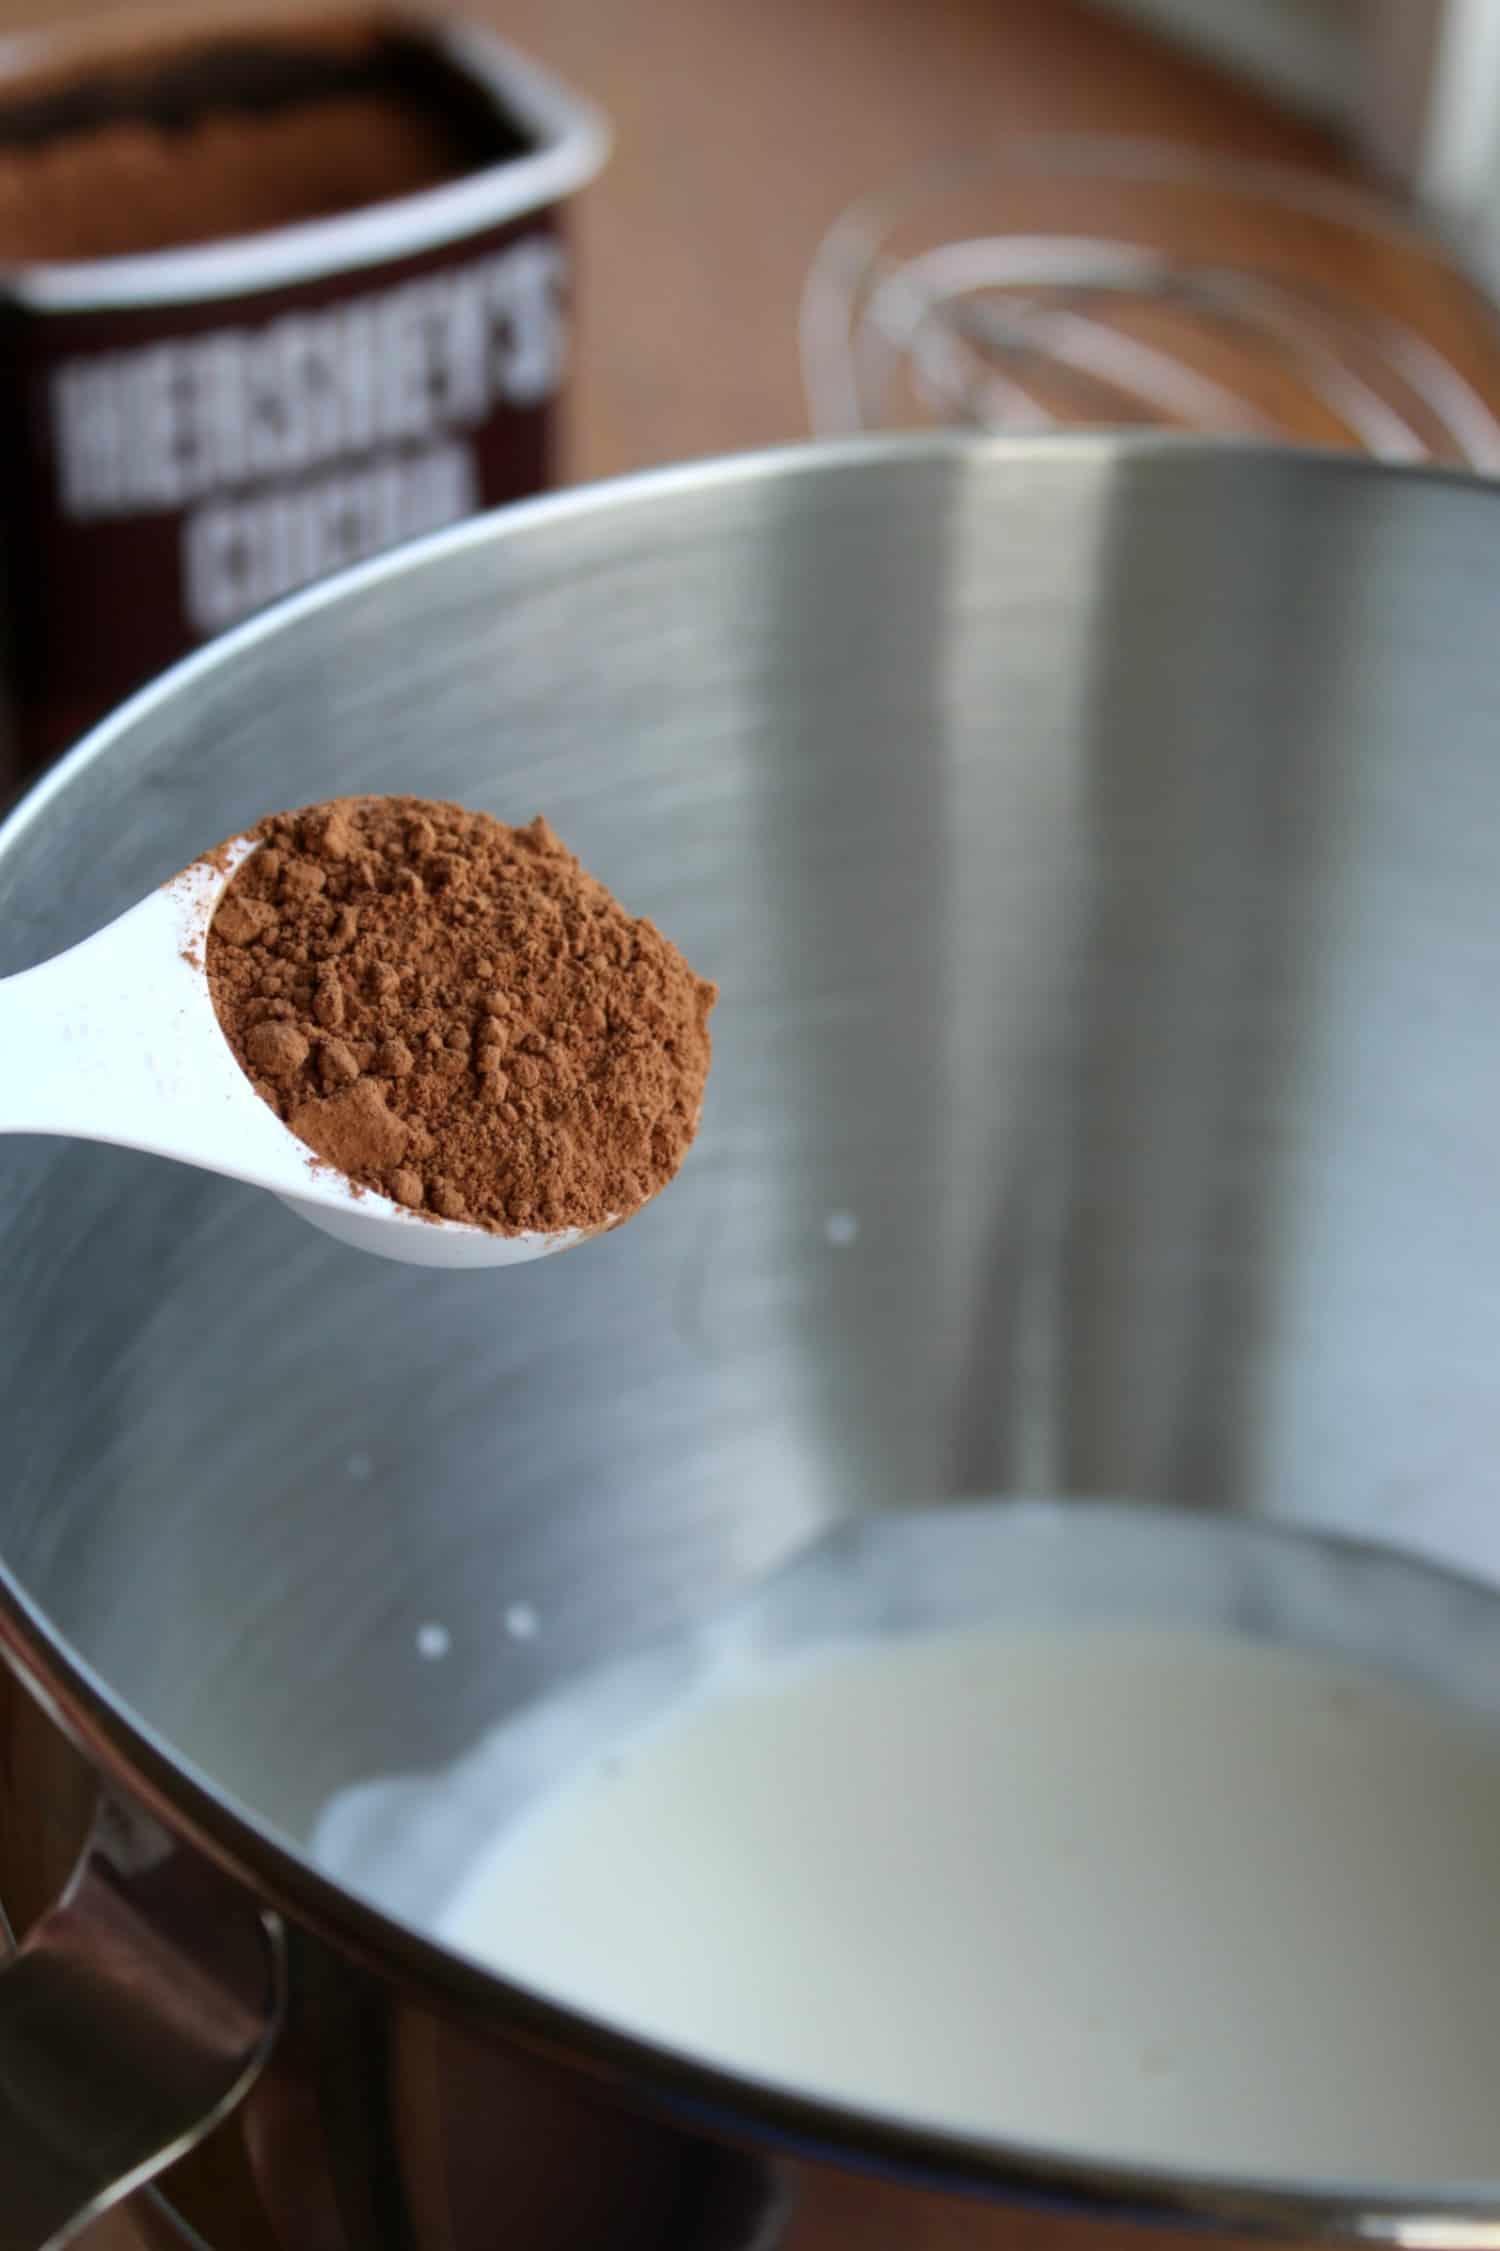  wendys frosty recipe, put cocoa into a mixing bowl.